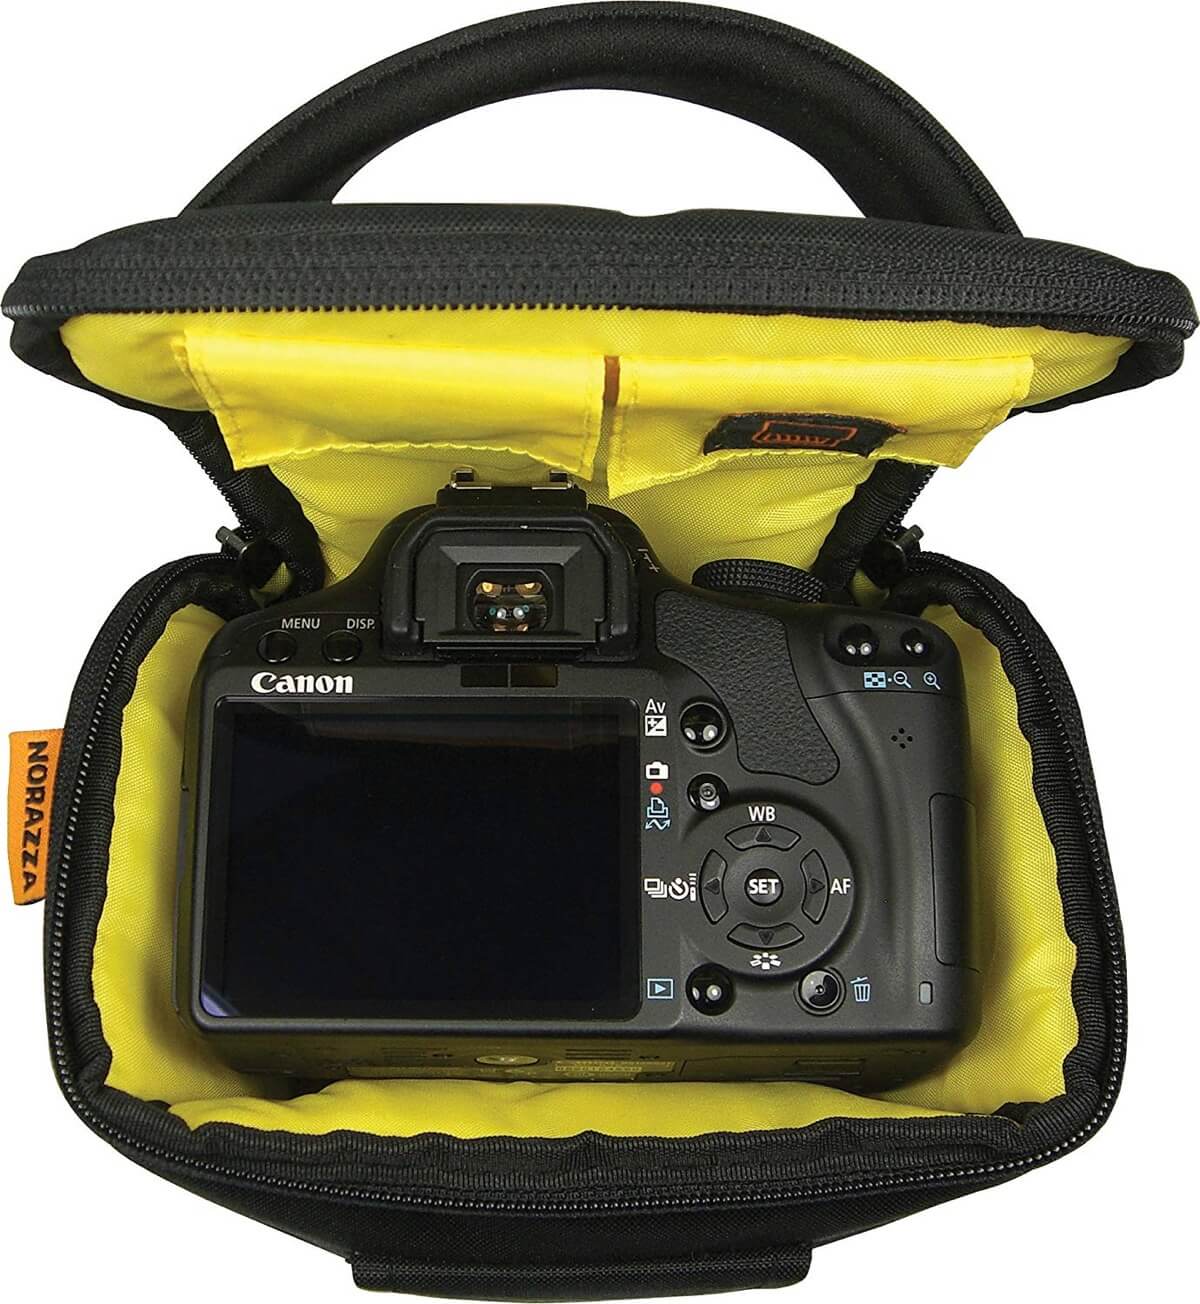 What is the Best Small Camera Bag?